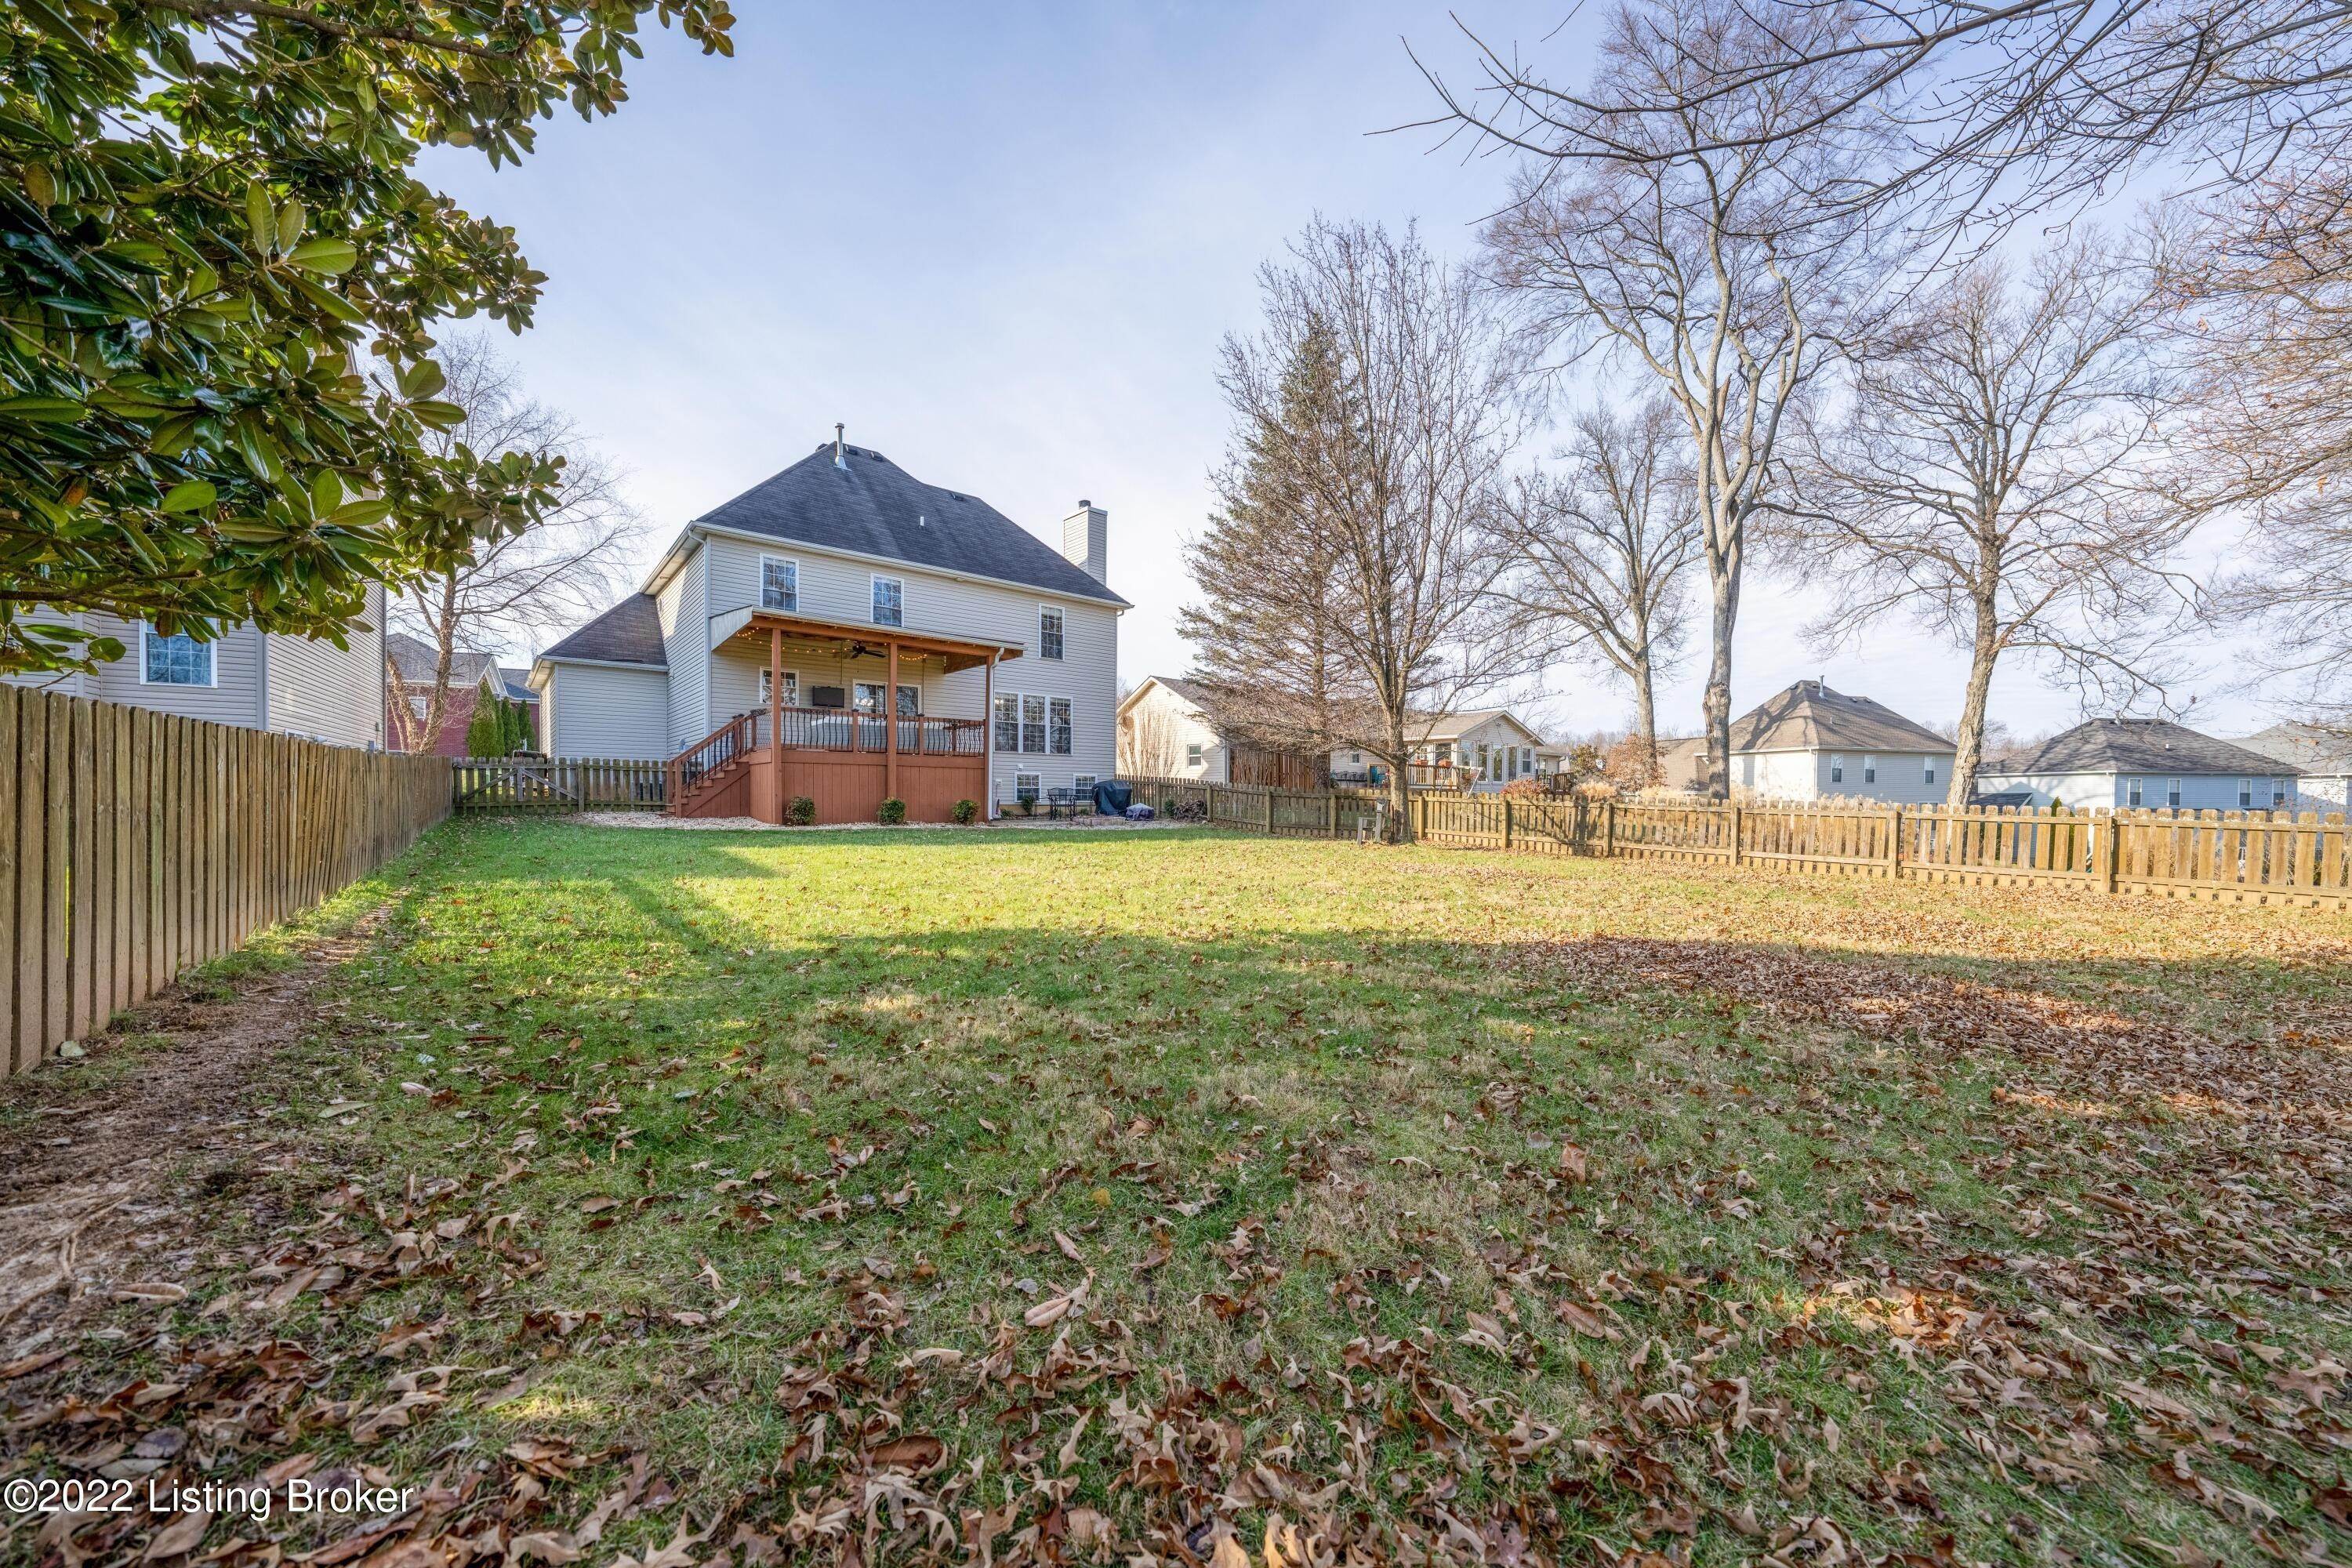 41. Single Family at Louisville, KY 40299